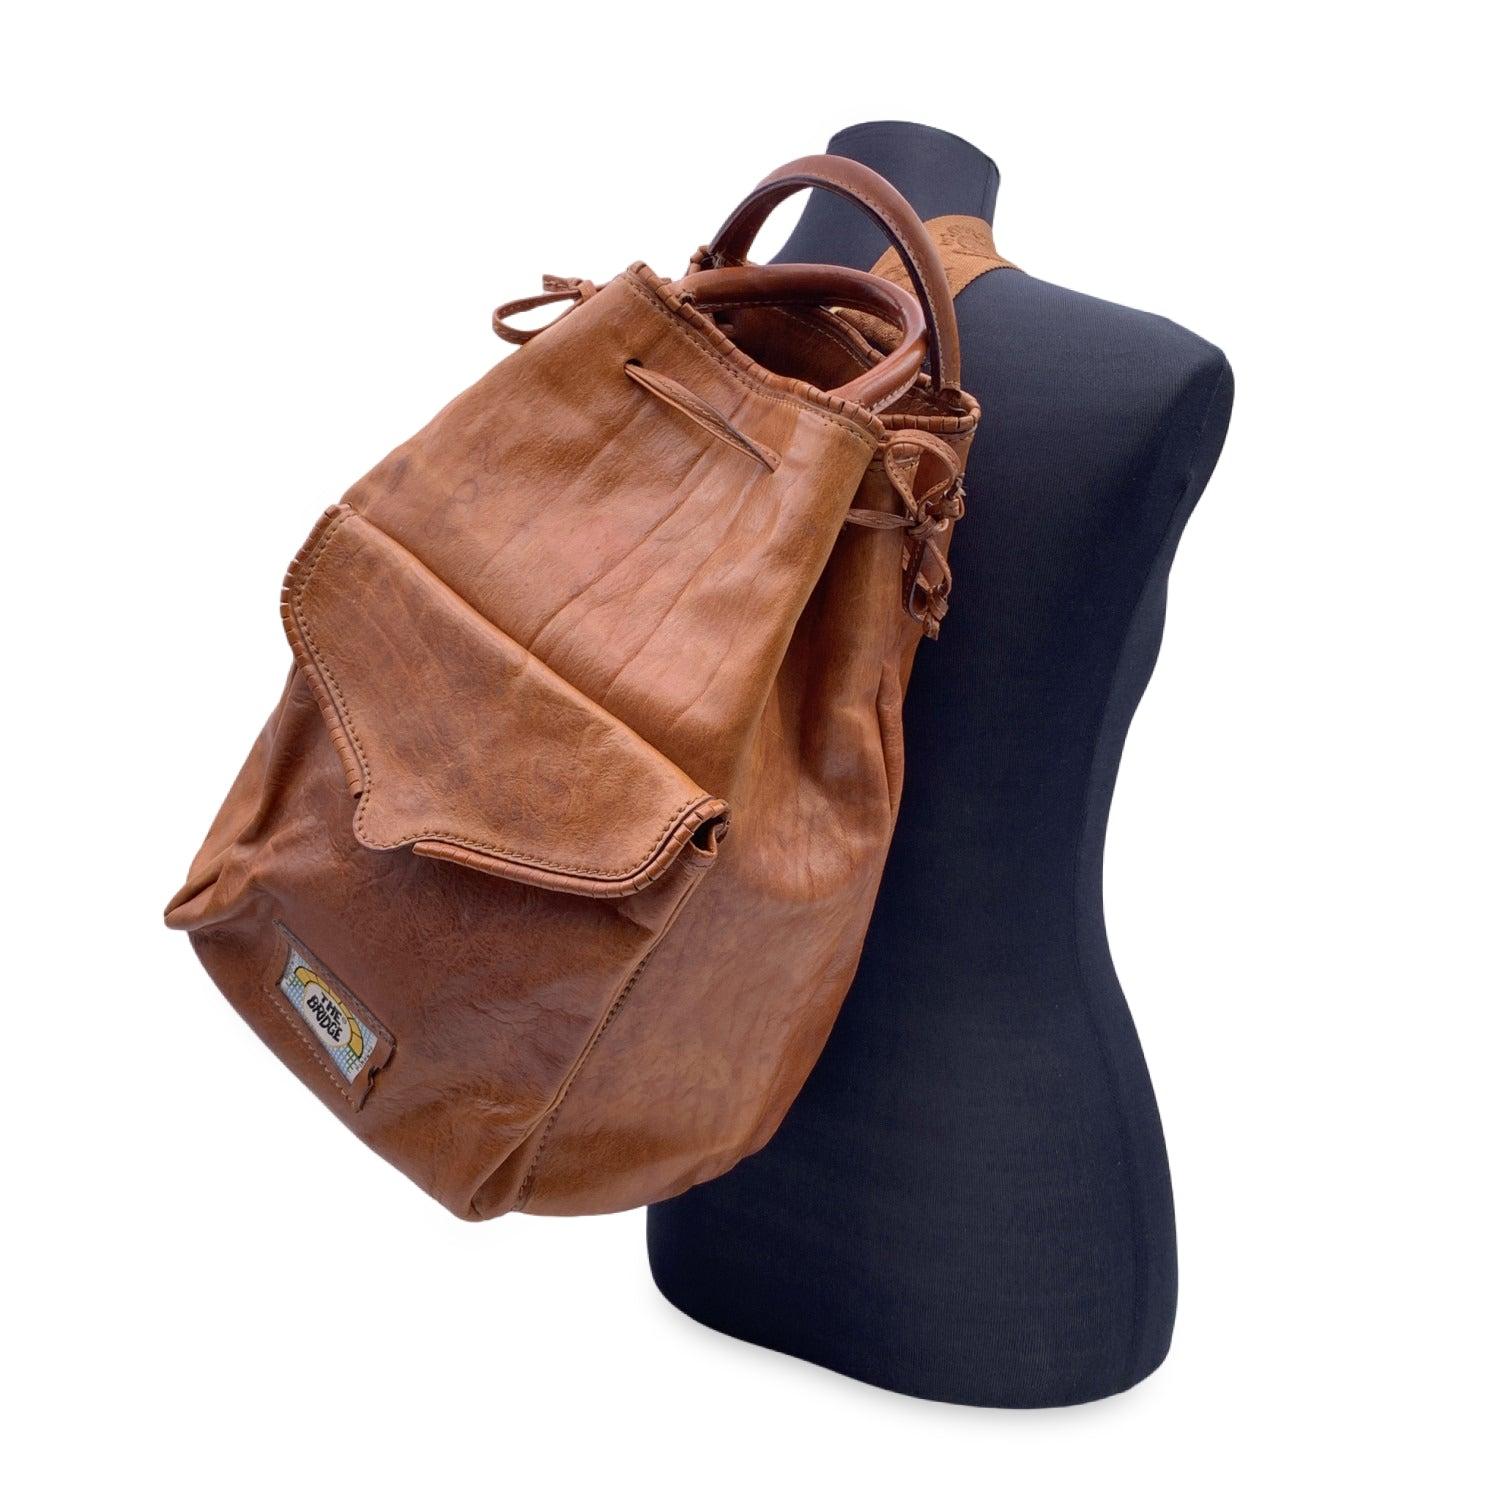 Vintage The Bridge brown leather backpack. Drawstring closure on top. 1 front flap pocket. Adjustable single shoulder strap and double top carry handles. Unlined. 1 side zip pocket inside. The Bridge tag inside Condition B - VERY GOOD Gently used.